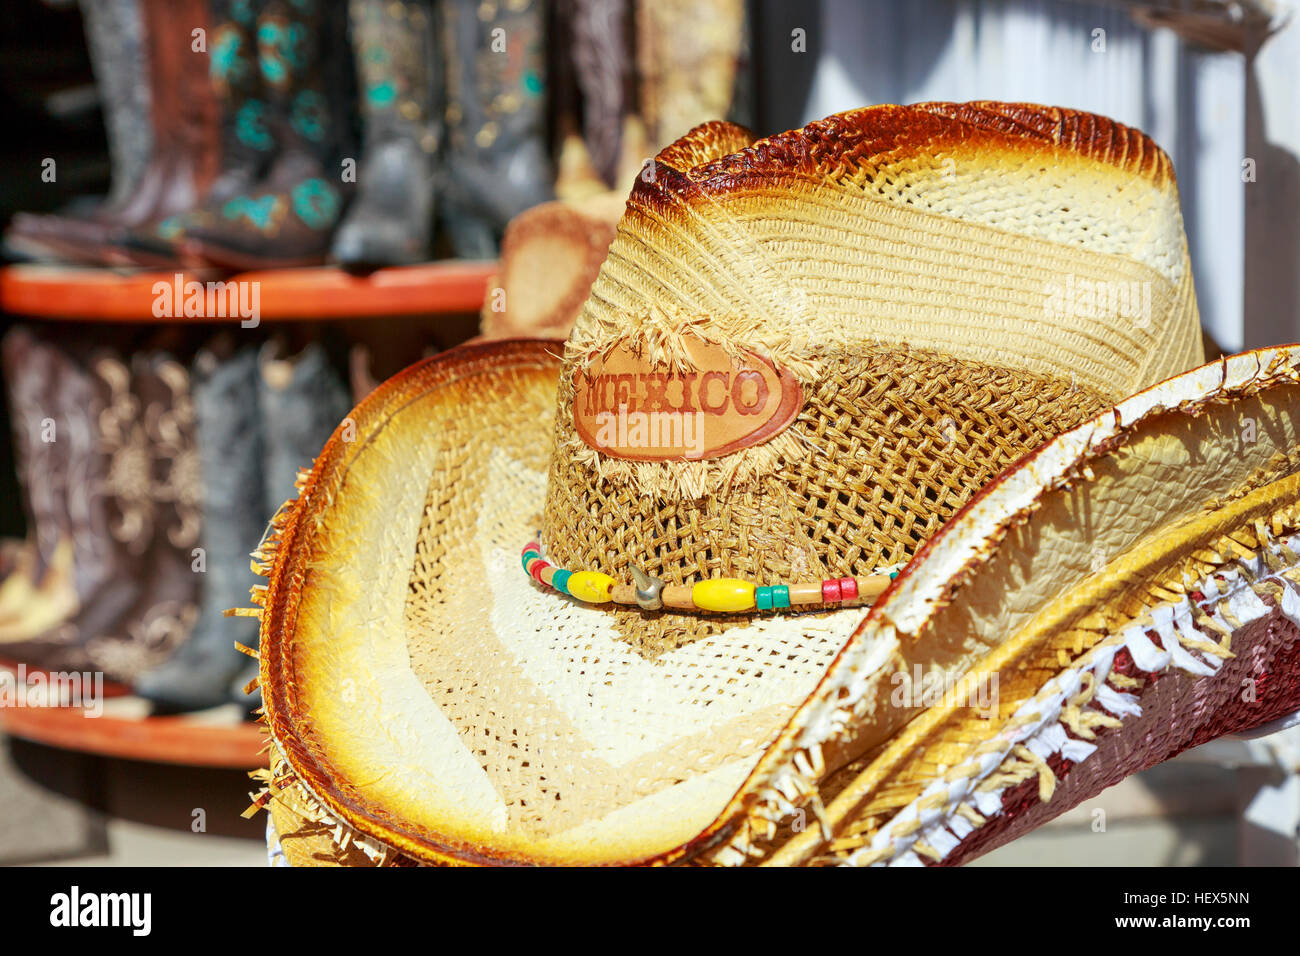 https://c8.alamy.com/comp/HEX5NN/straw-hat-embossed-with-mexico-and-multicolored-cowboy-boots-in-the-HEX5NN.jpg